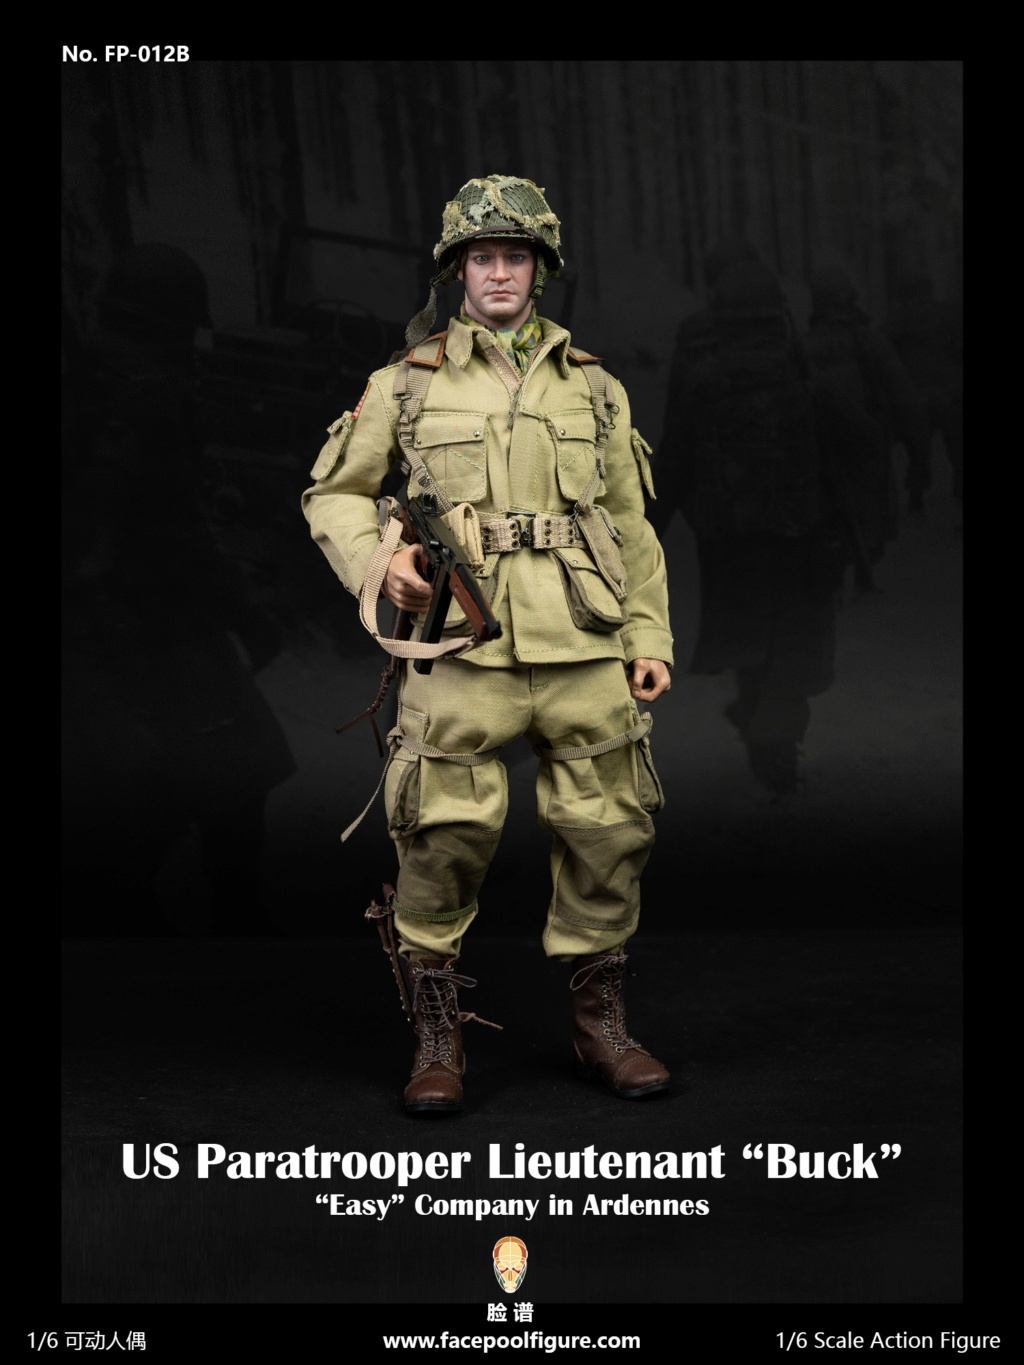 USParatrooper - NEW PRODUCT: Facepool: 1/6 Scale US Paratrooper Lieutenant “Buck” (FP012A & B) (2 versions) 10140810